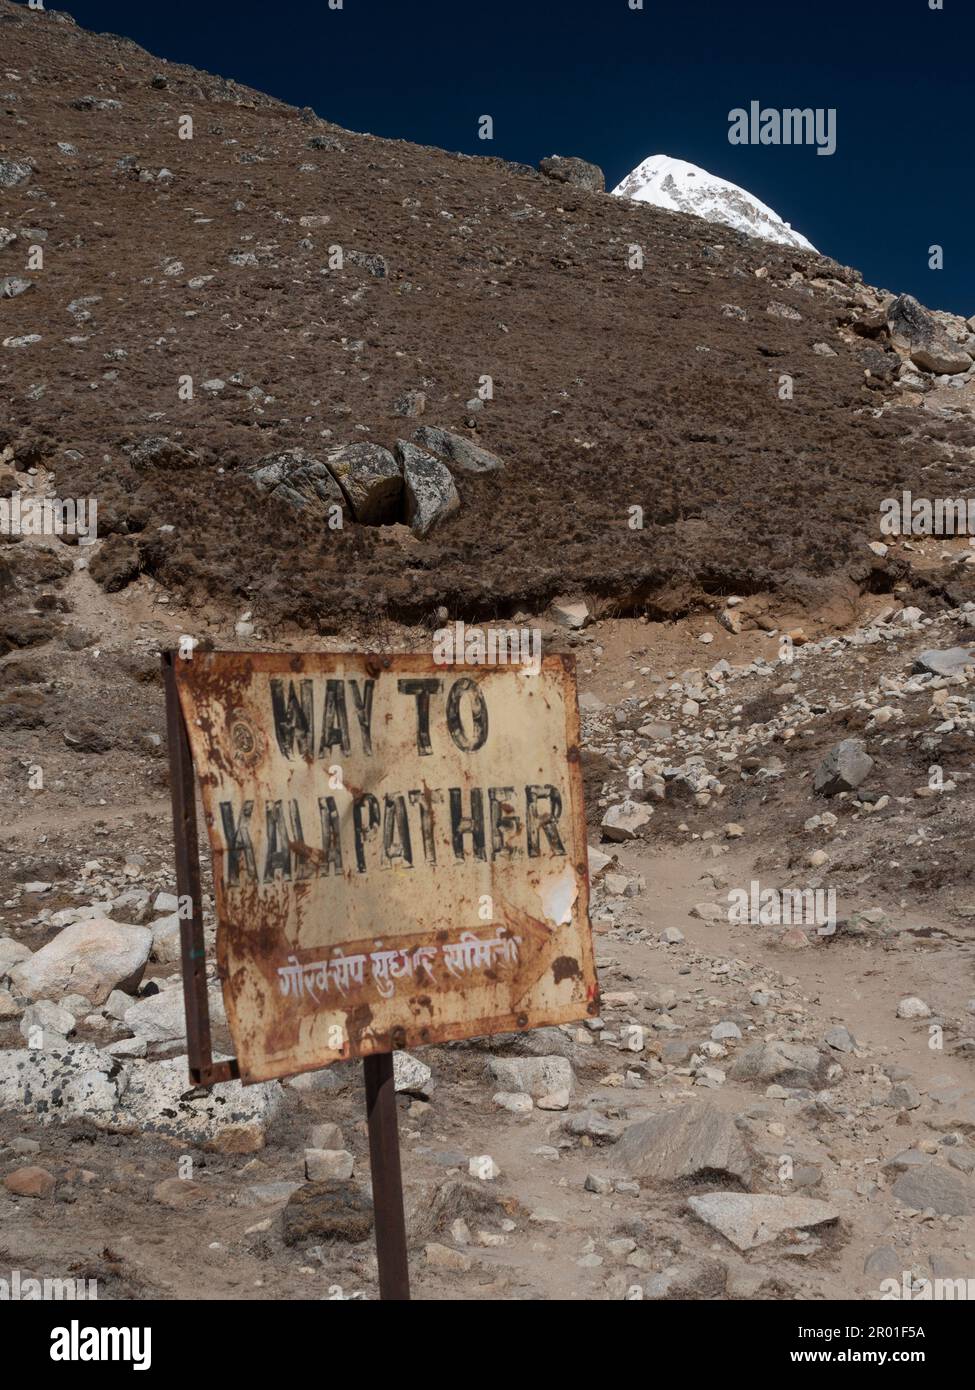 Nepal. Old sign showing the direction of Kala Pattar view point with Pumori mountain in the background. Stock Photo